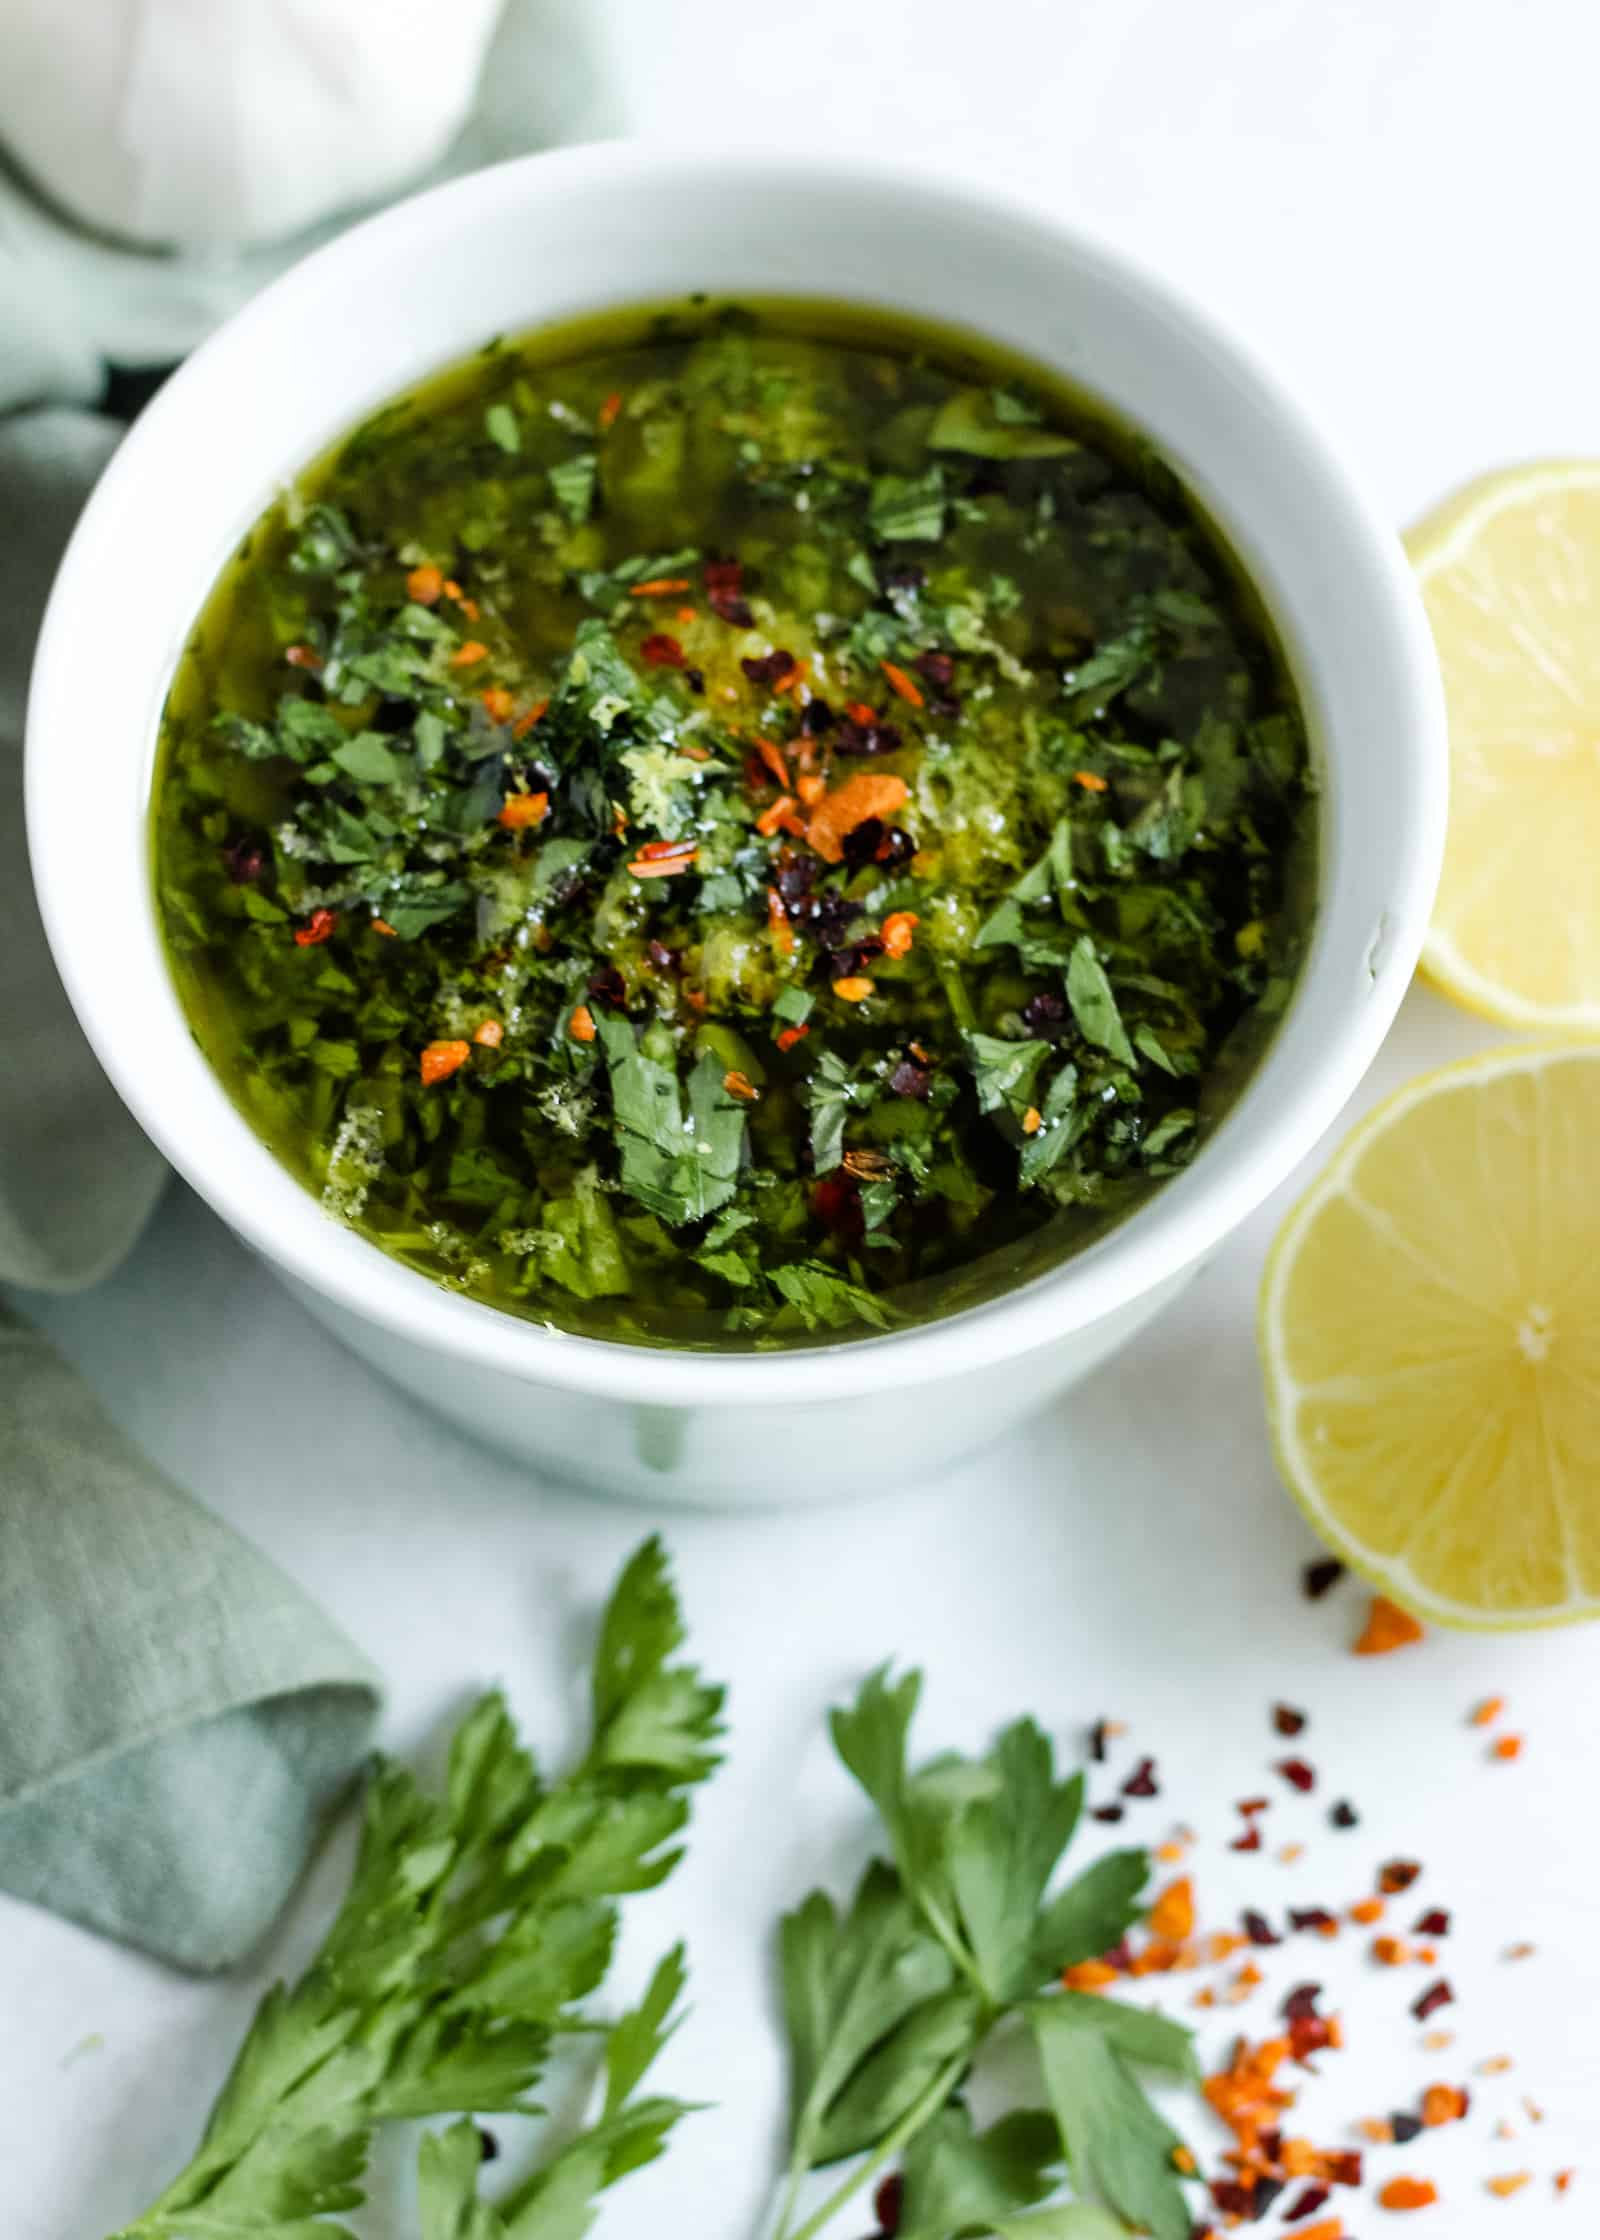 Try this Lemon Chimichurri Sauce for an easy, no-cook option to add fresh flavor to any meal